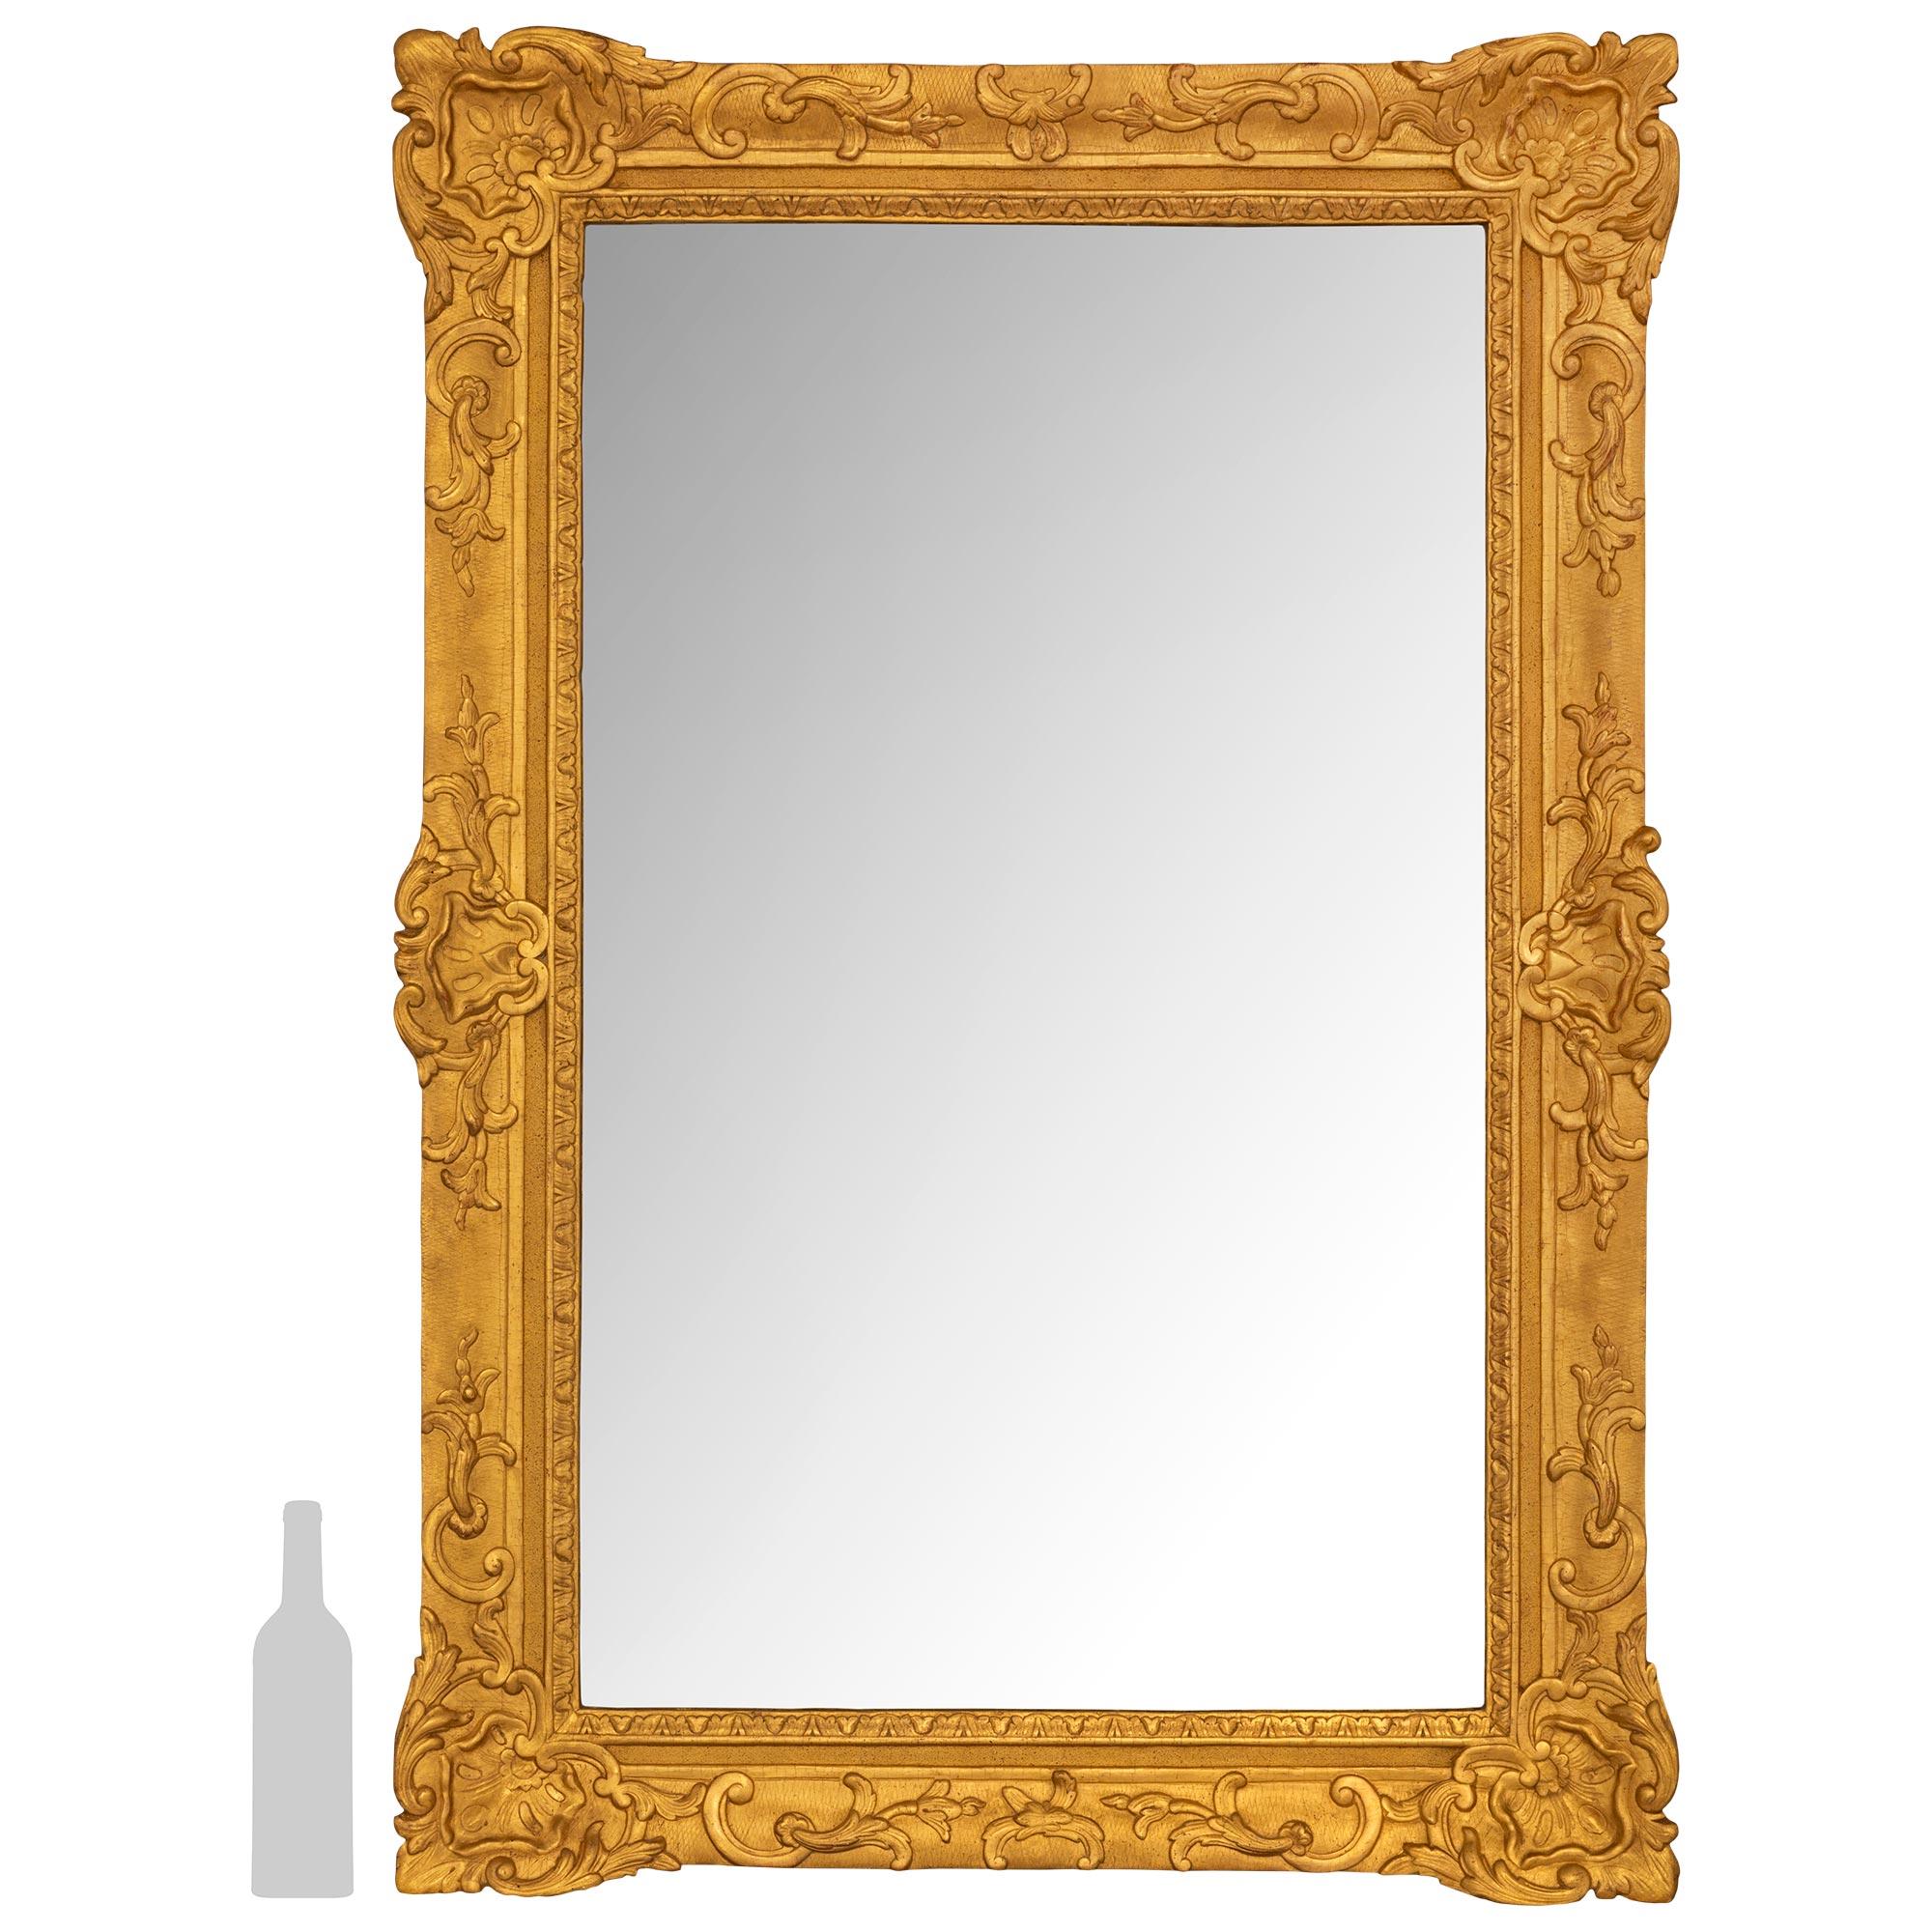 An elegant French 18th century Regence period rectangular giltwood mirror. The mirror showcases a stunning frame with a lattice designed background with foliate reserves on the corners with a central shell like design. The reserves are flanked by